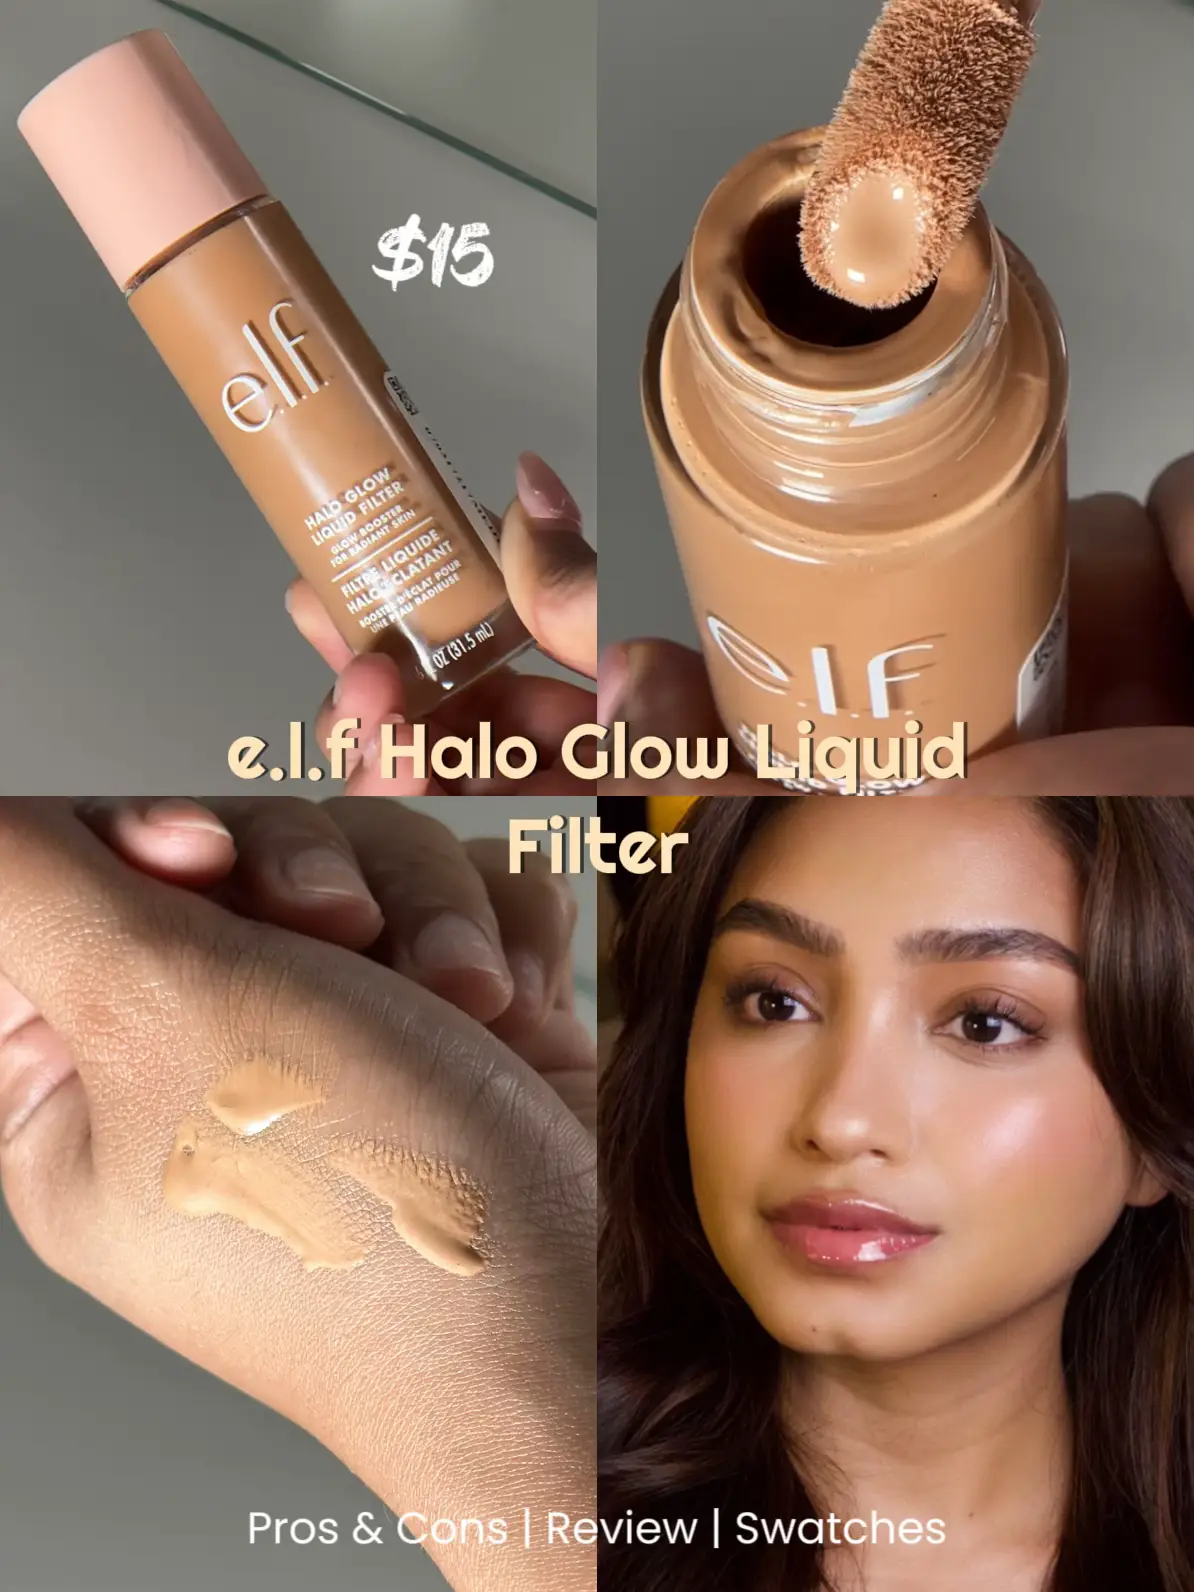 E.l.f. Halo Glow Liquid Filter Review: With Photos